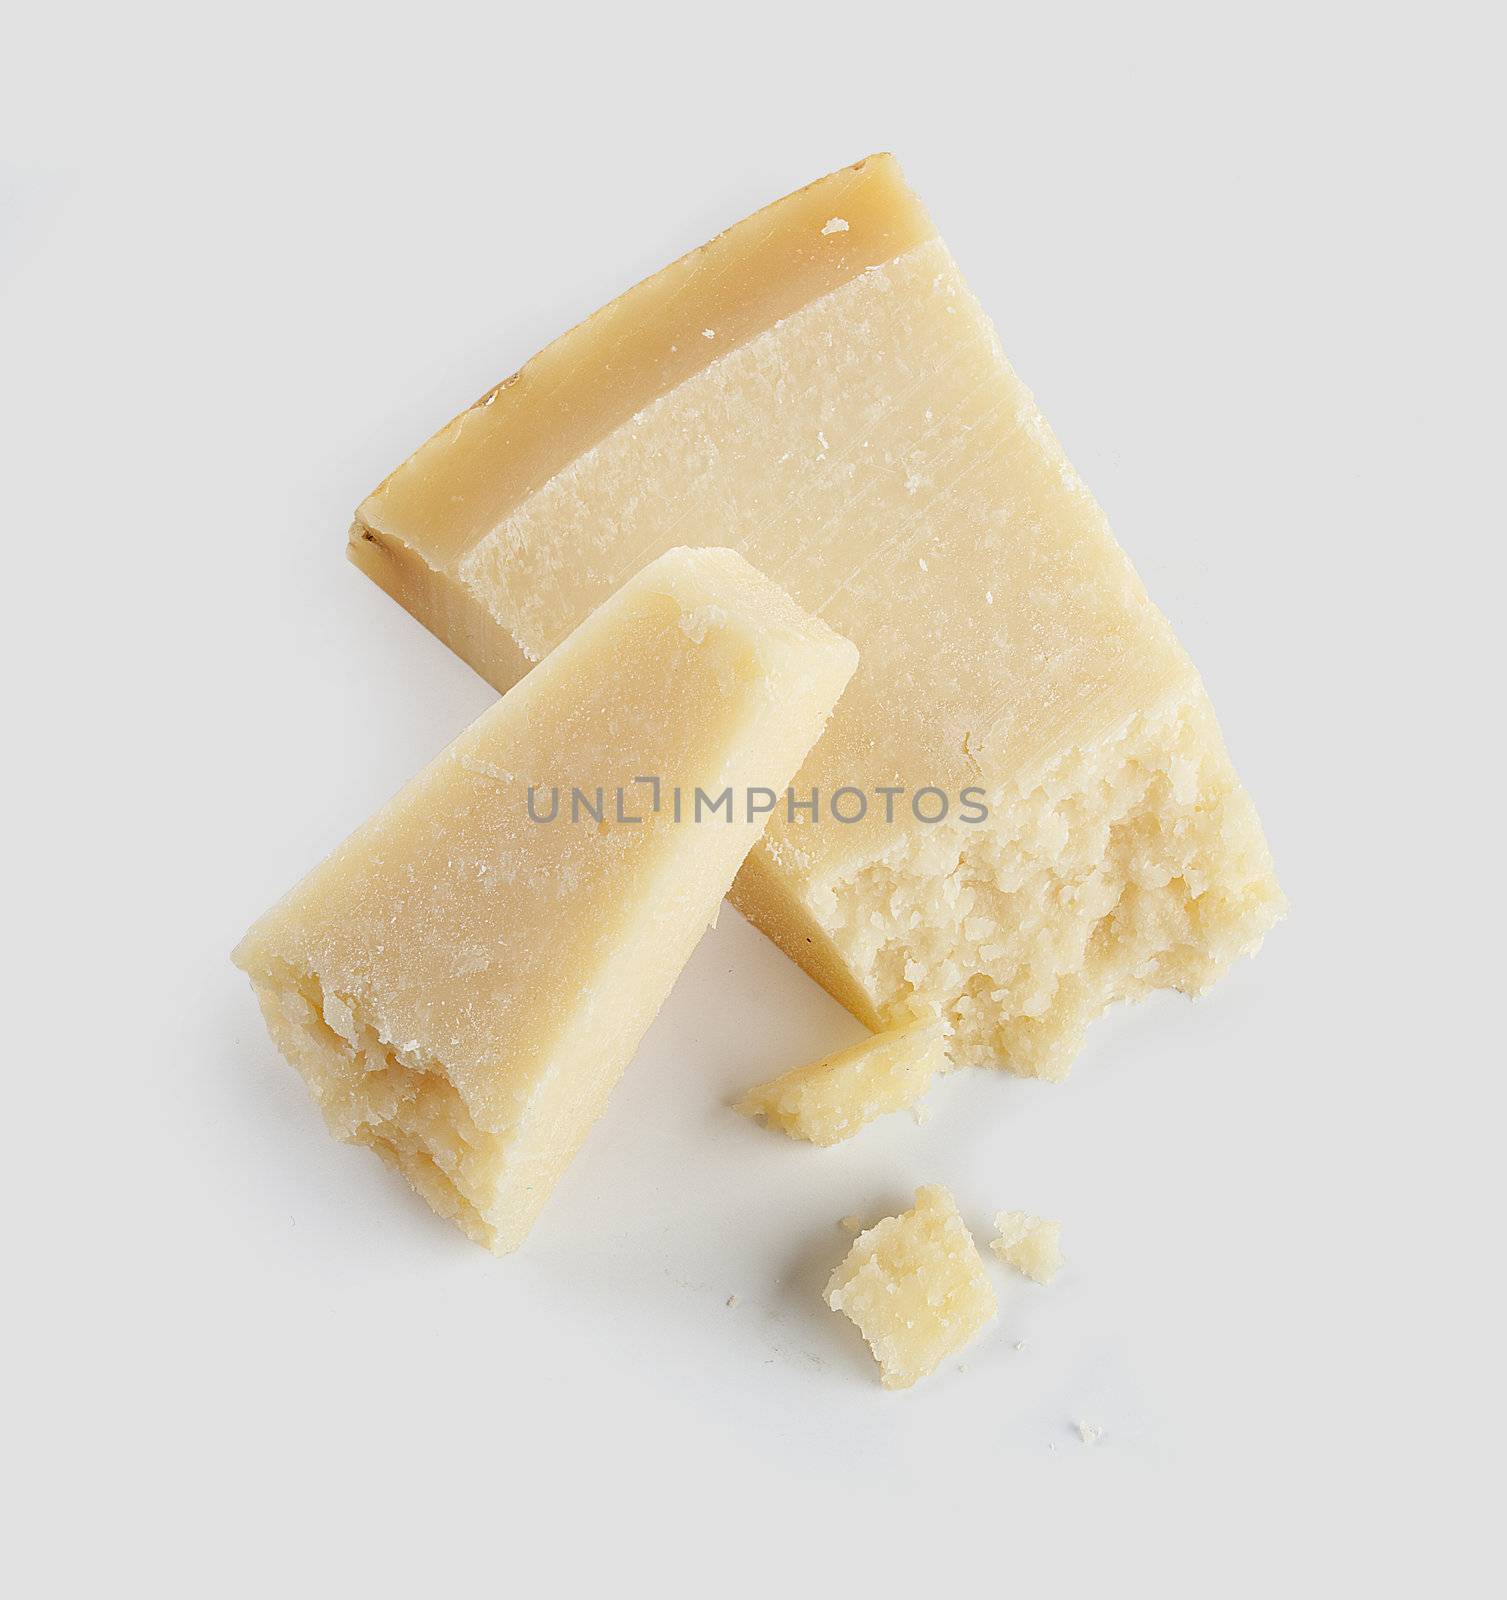 Two pieces of hard cheese on the grey background